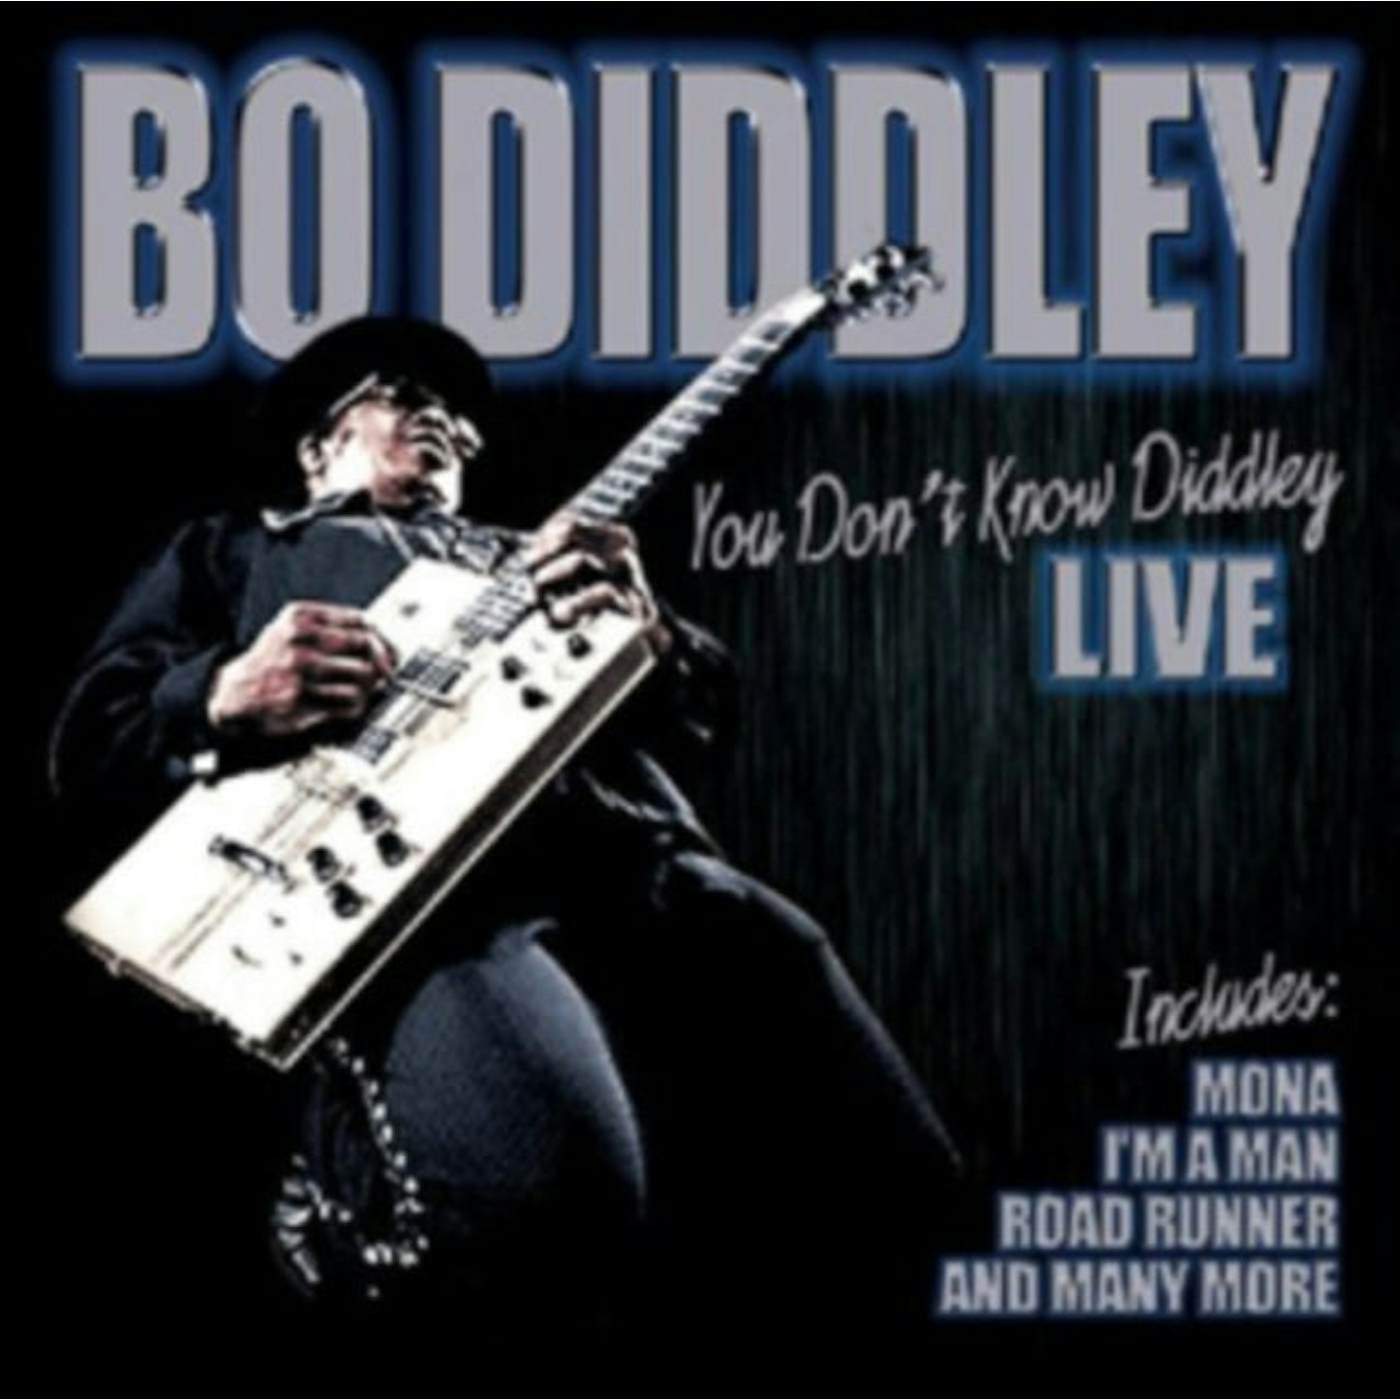 Bo Diddley CD - You Don't Know Diddley